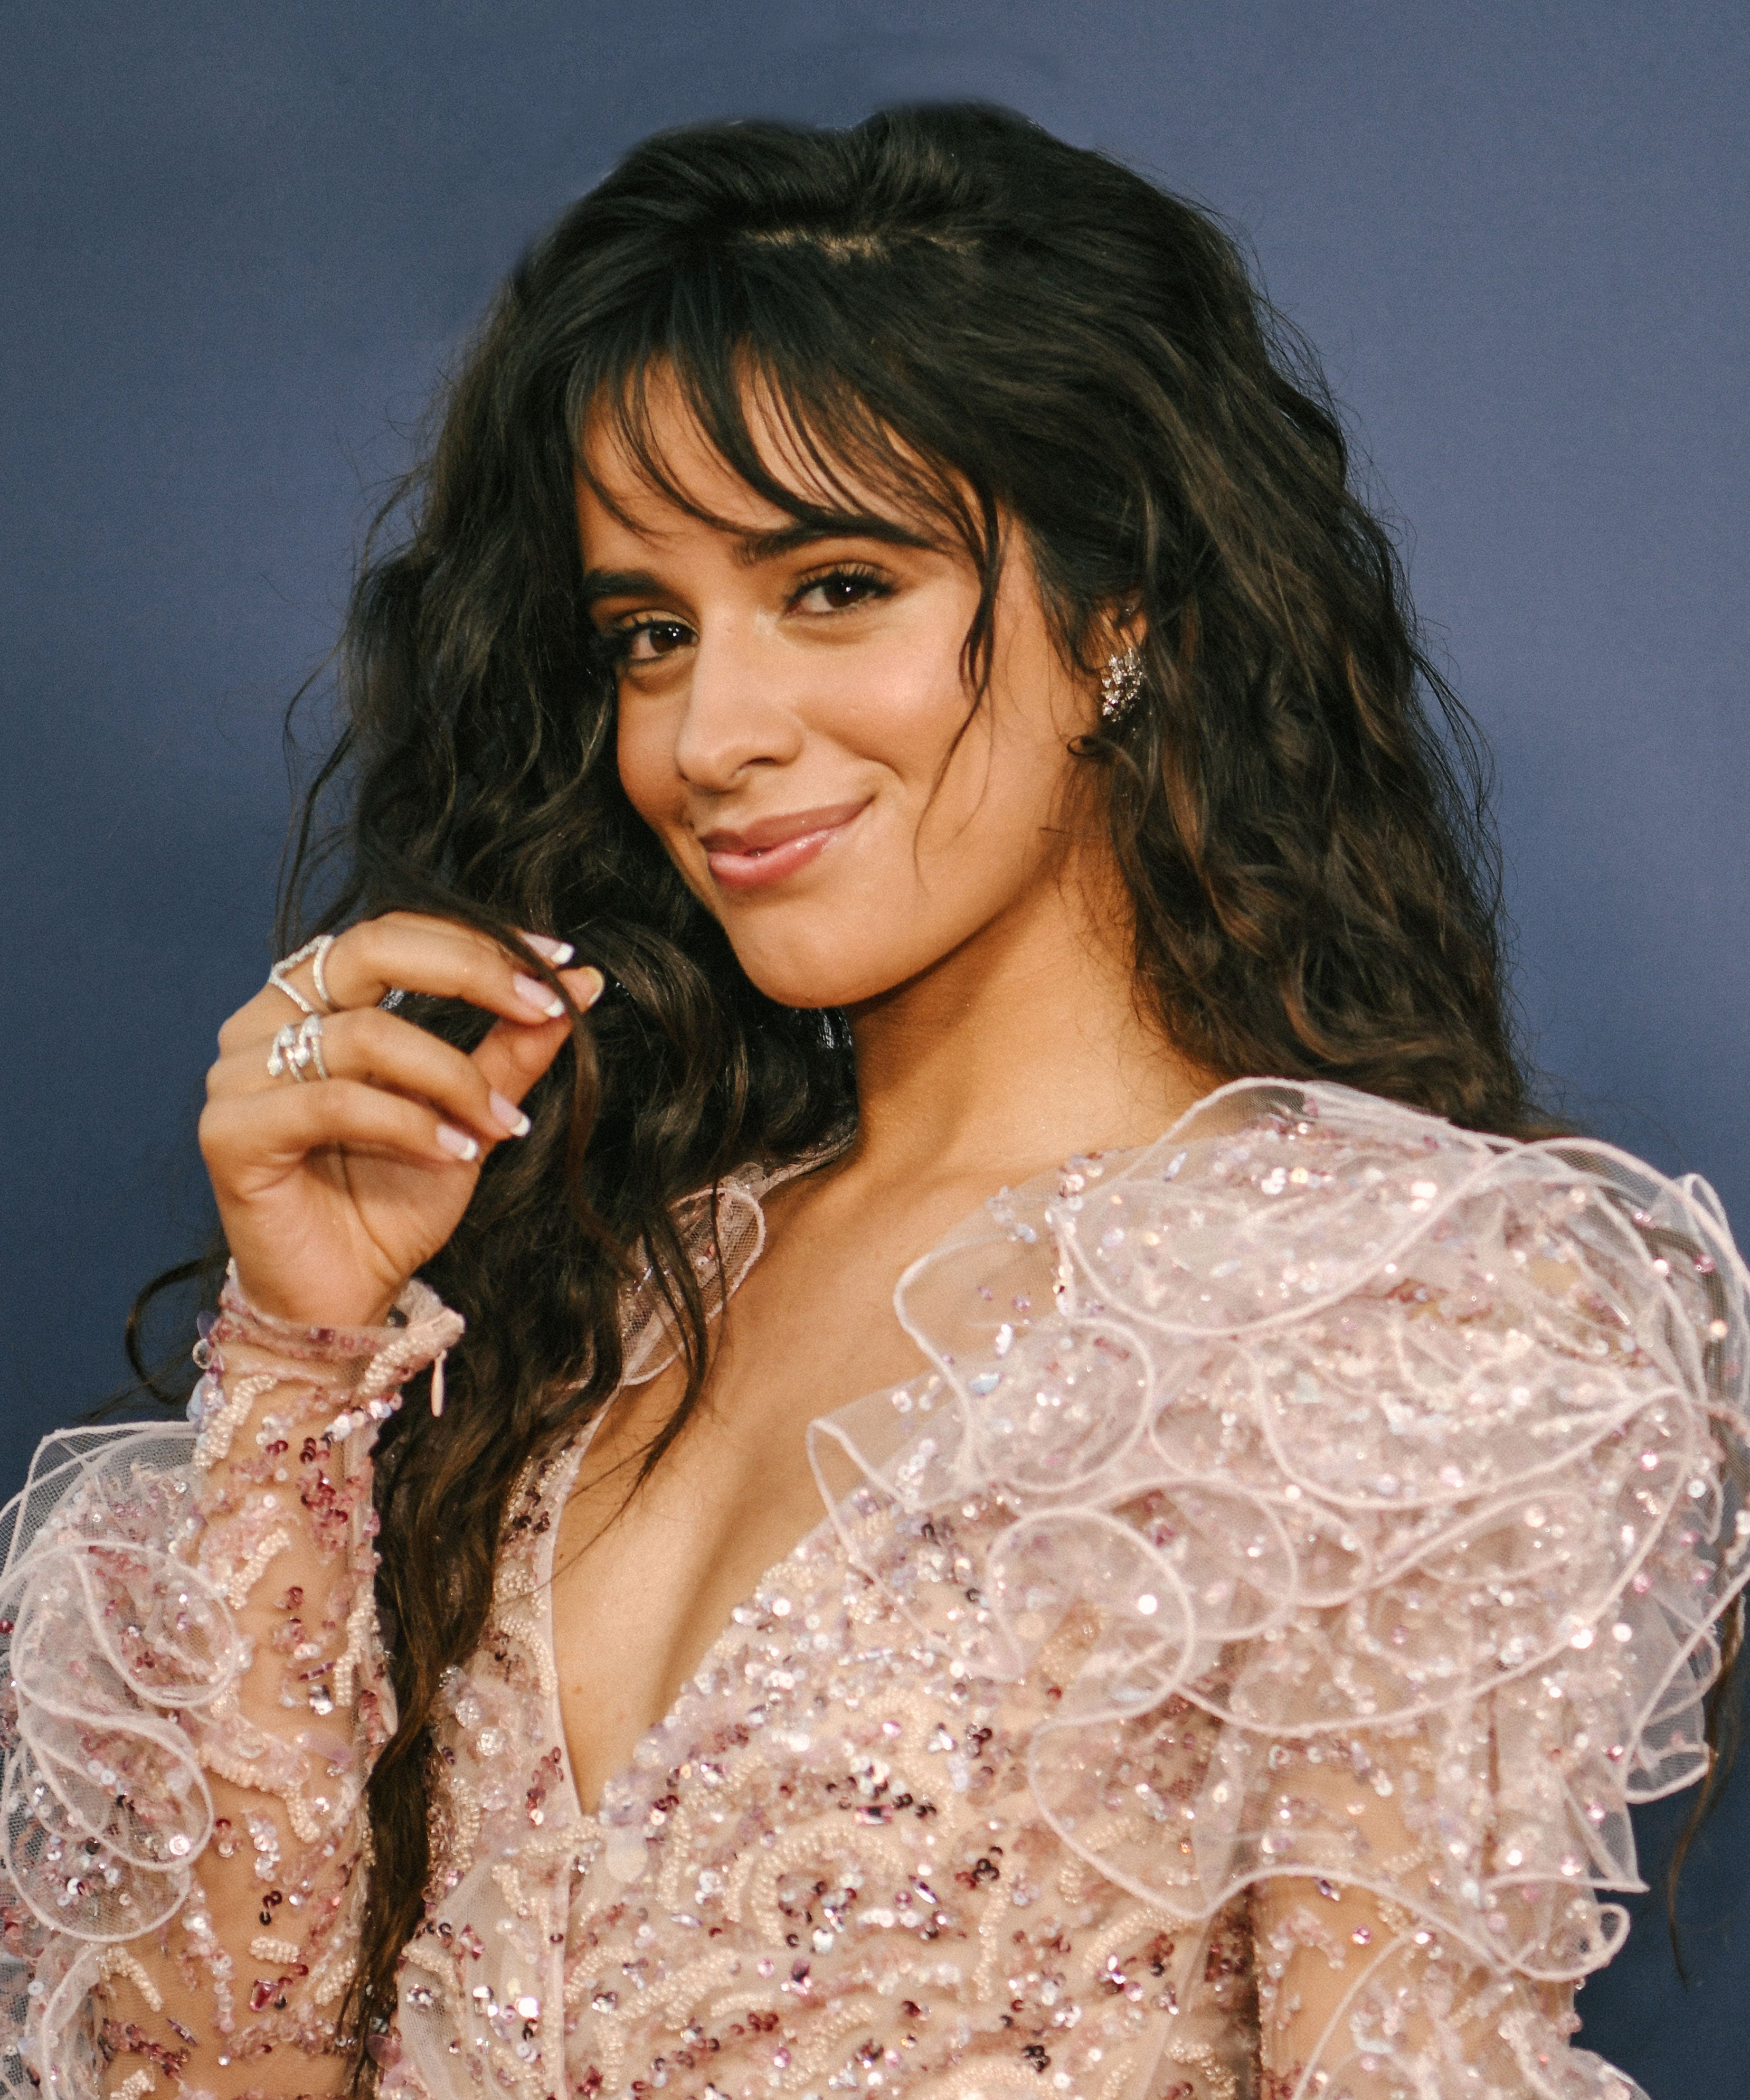 Camila Cabello Shocks Fans With Her New Hair Transformation: 'It's Time' -  News18